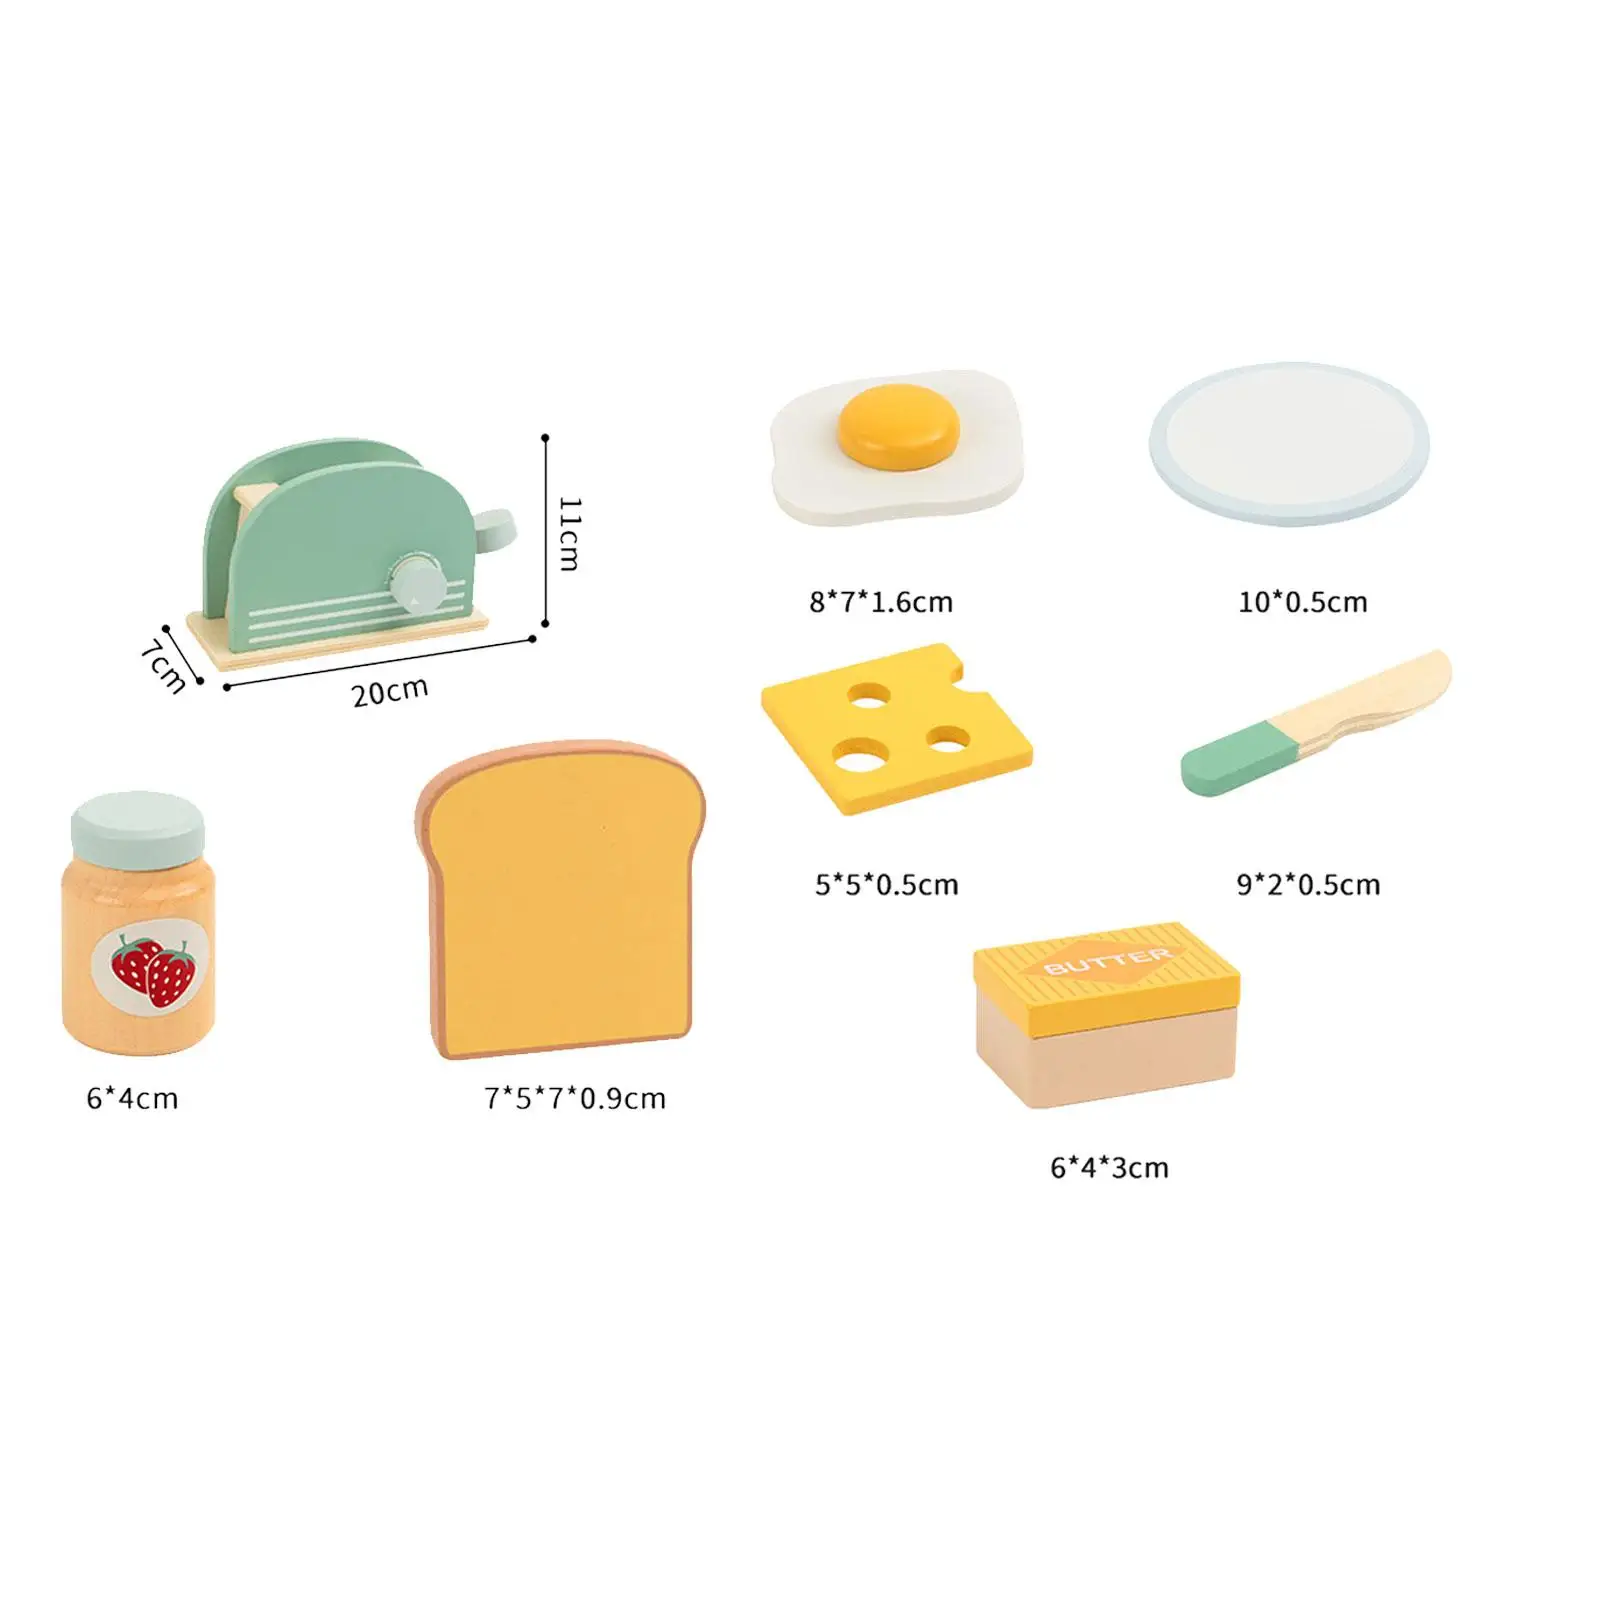 Pretend Play Kitchen Toys Simulation Preschool Learning Role Play Simulation Bread Machine for Birthday Handcraft Party Favors